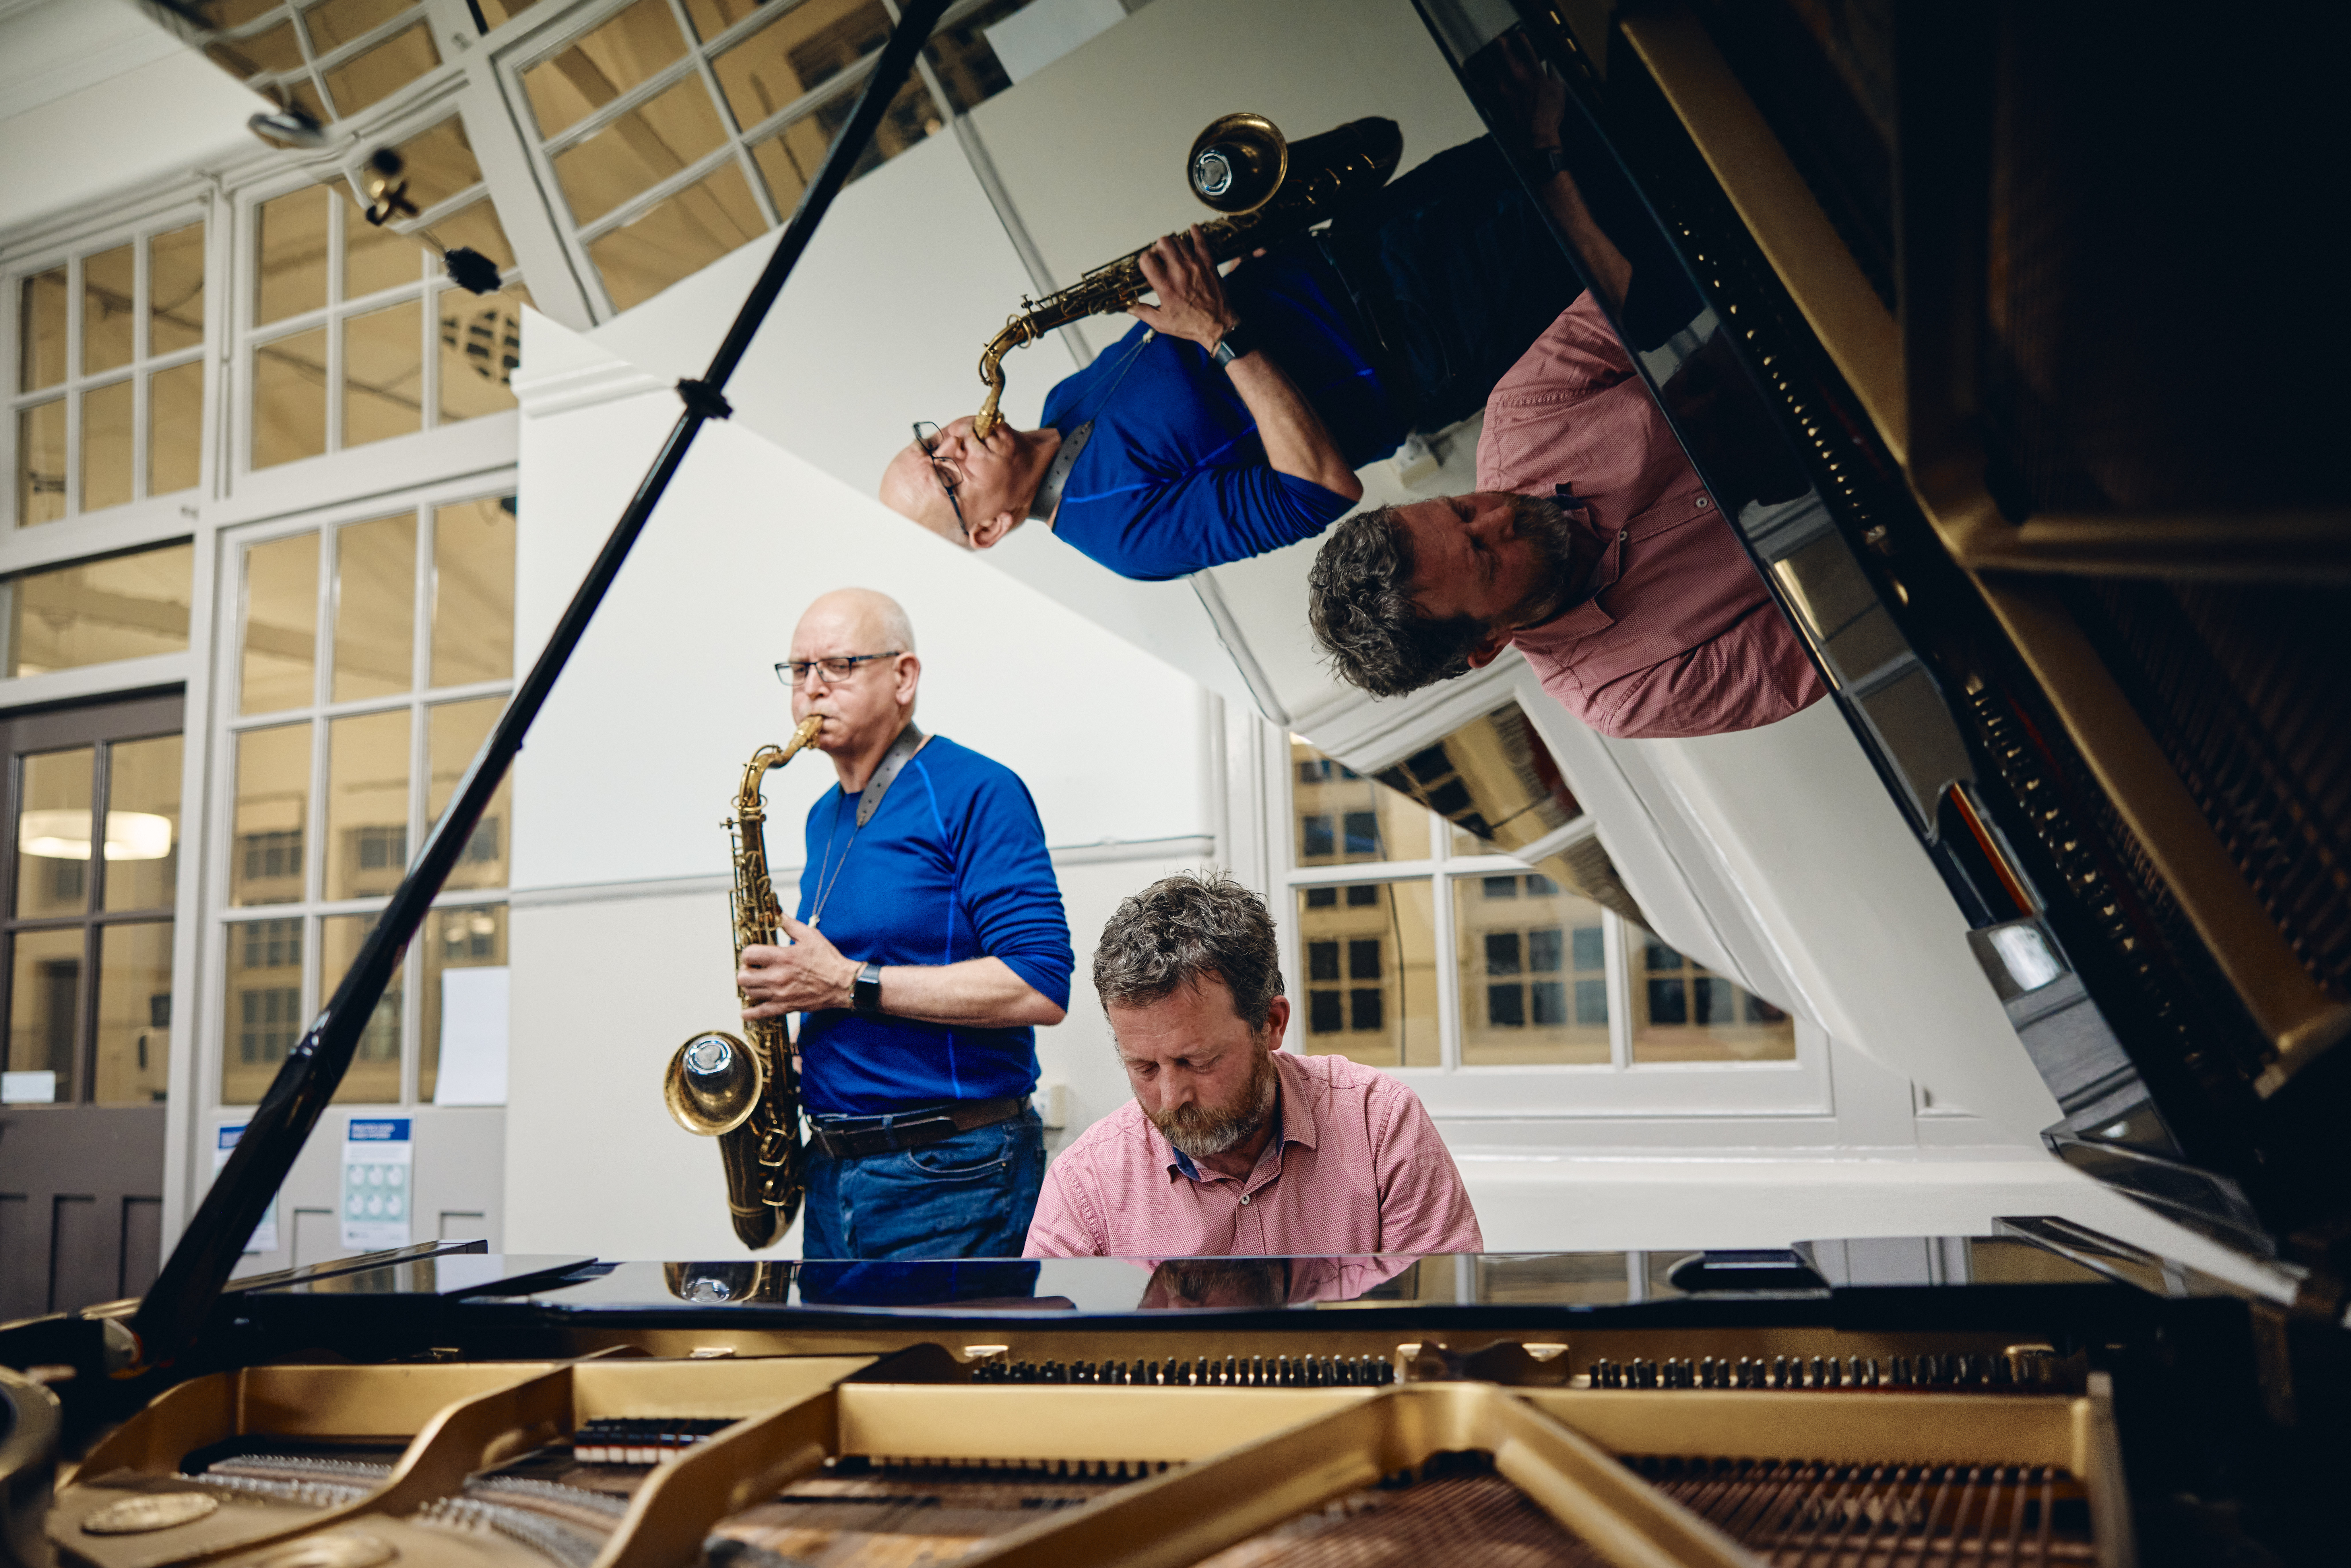 A older man in a red shirt plays a grand piano with a man in a blue shirt playing the saxophone. They are reflected in the open lid of the piano.